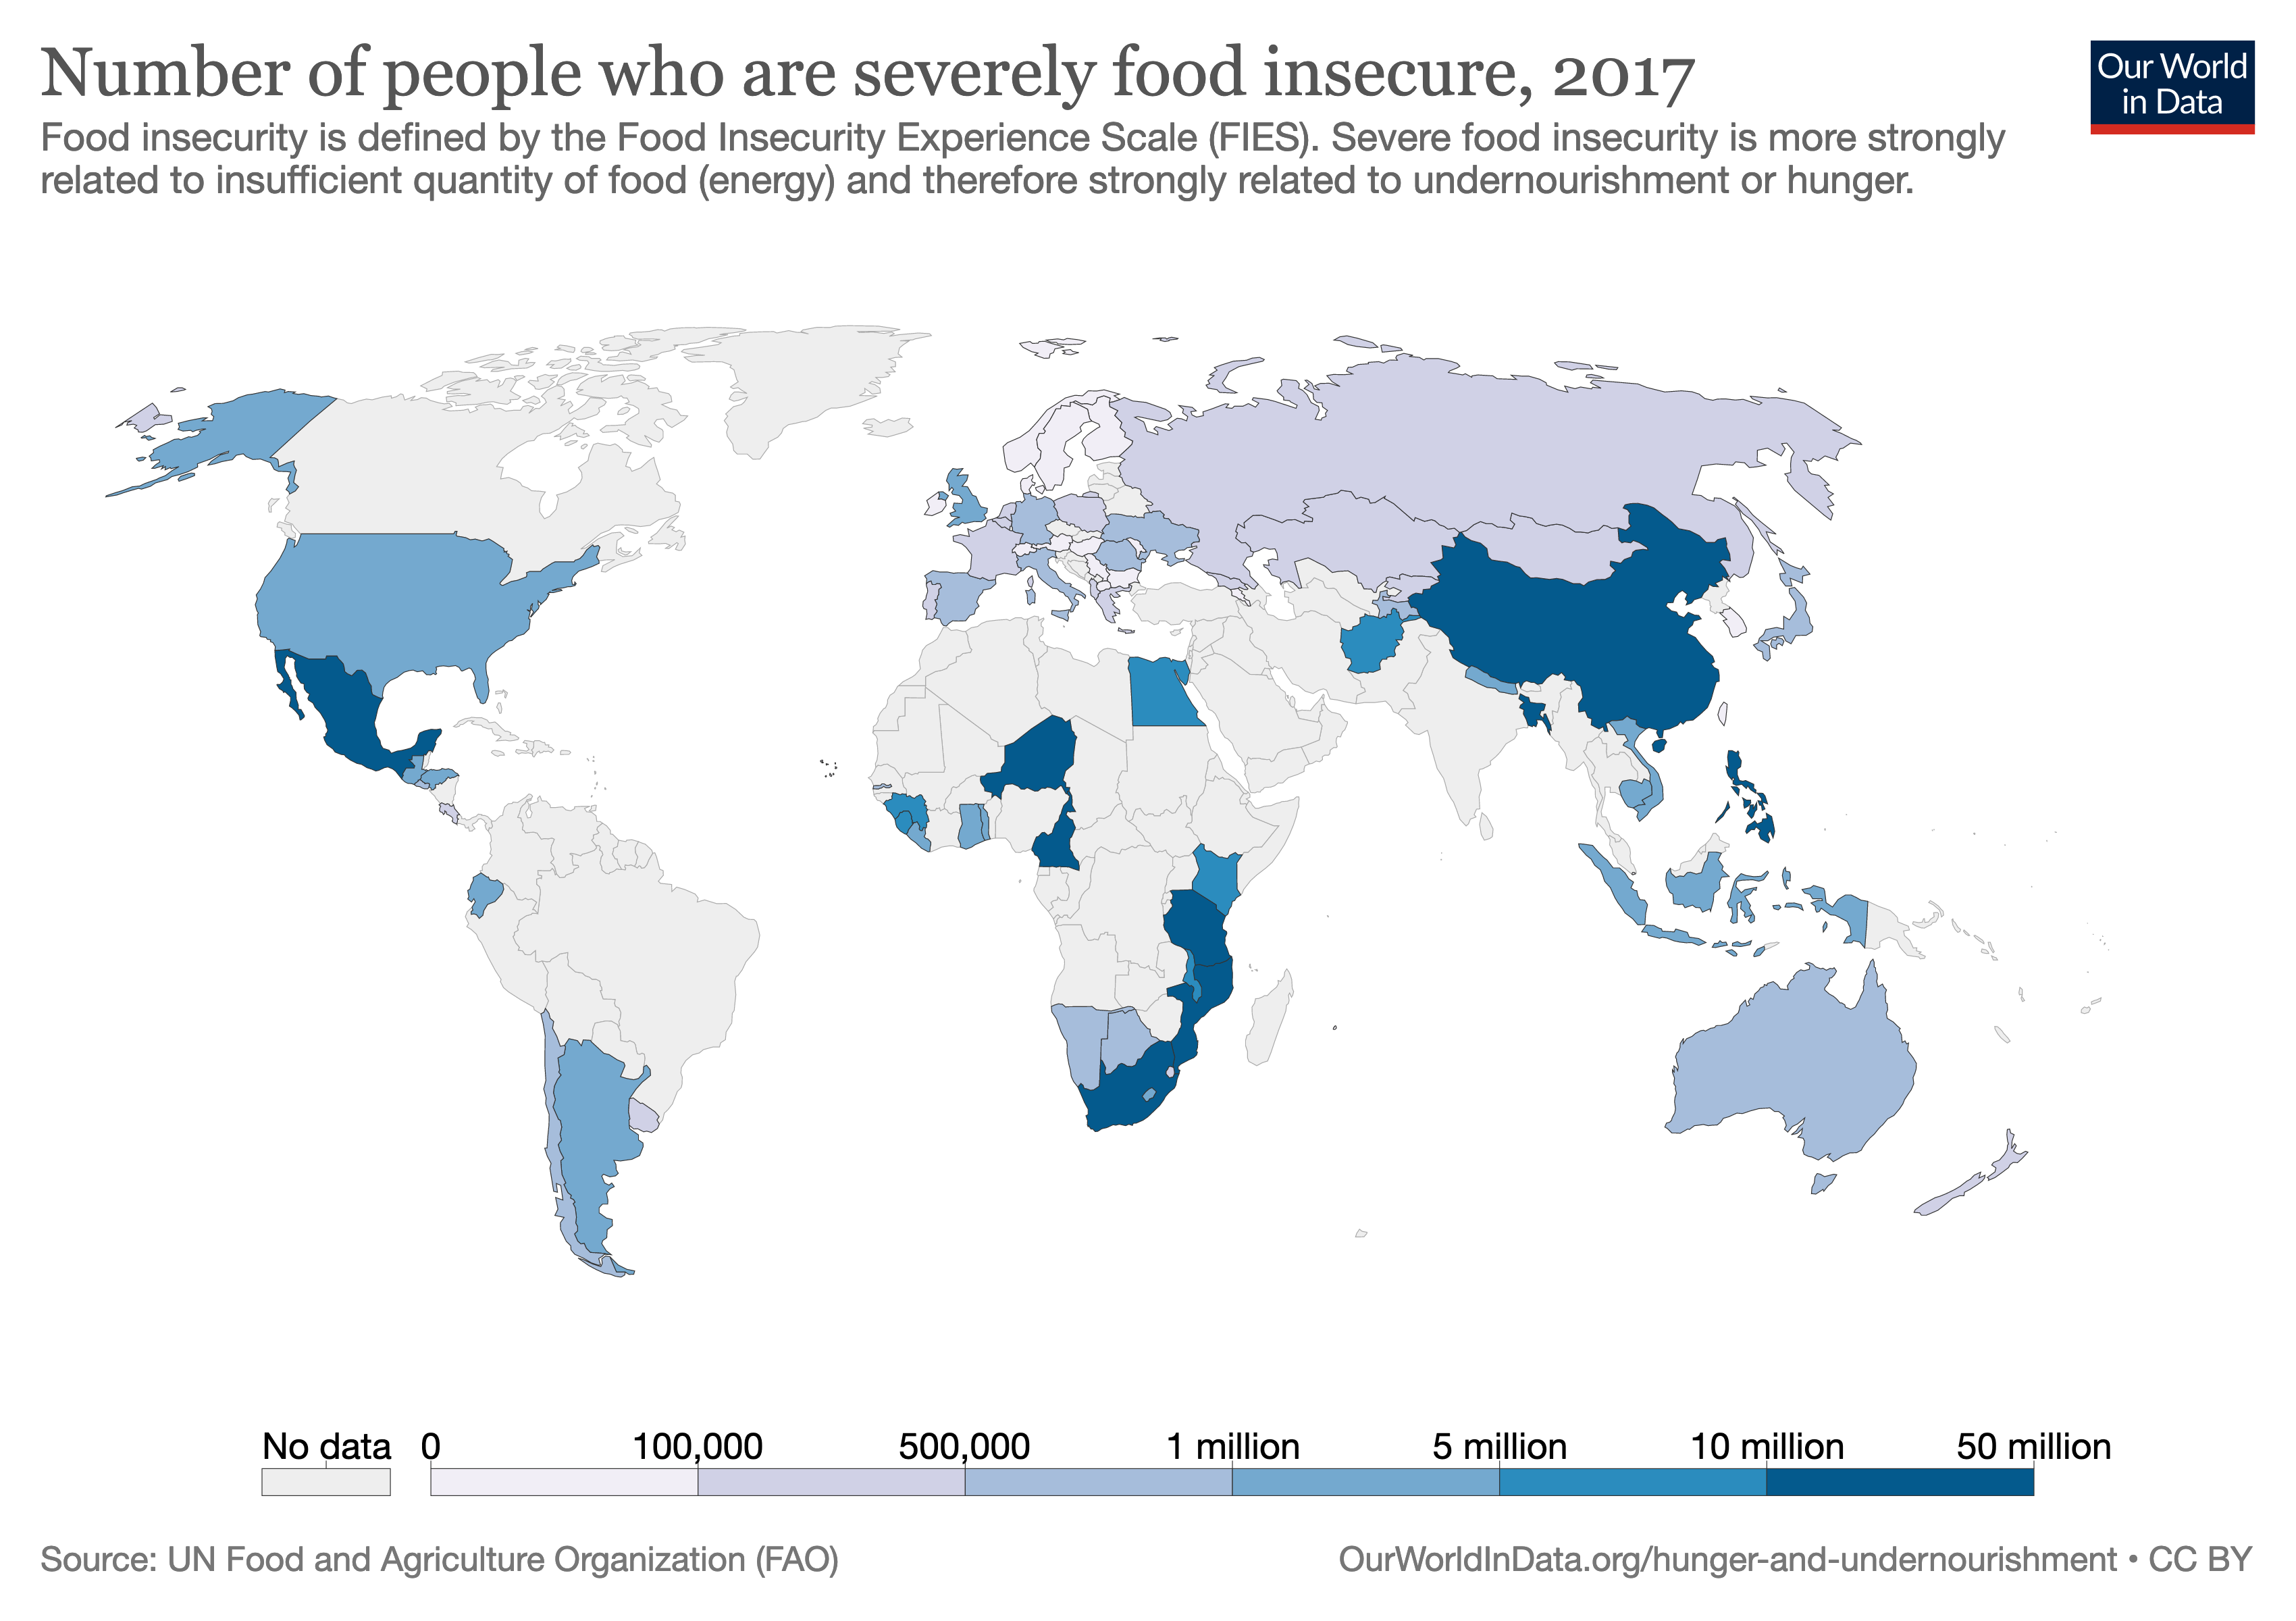 number-of-people-severely-food-insecure